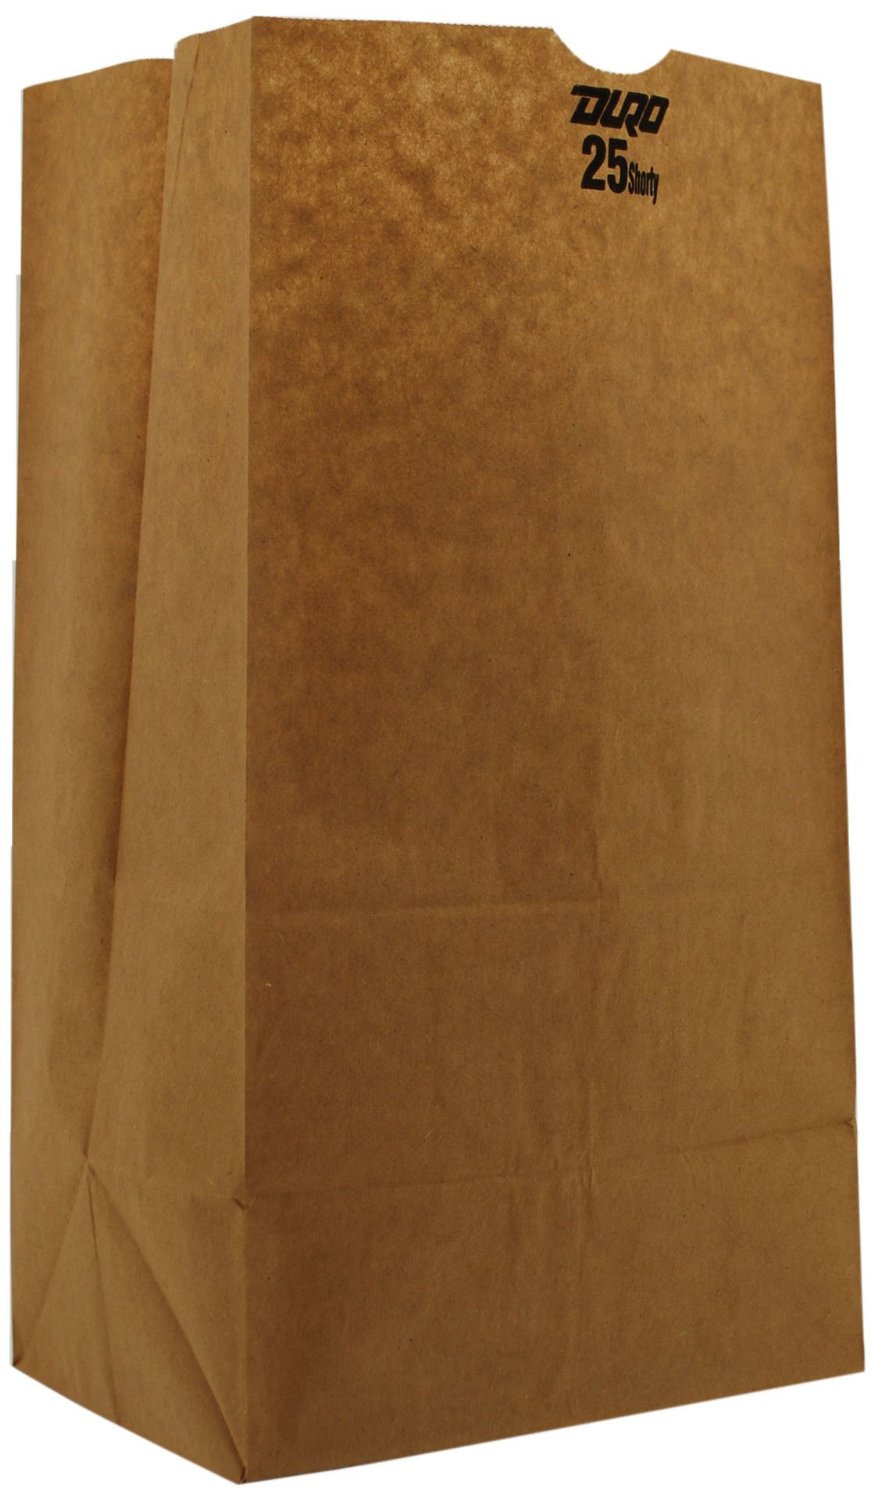 25# Short Natural Grocery
Bags 8.25 X 6.125 X 15.875 -
500